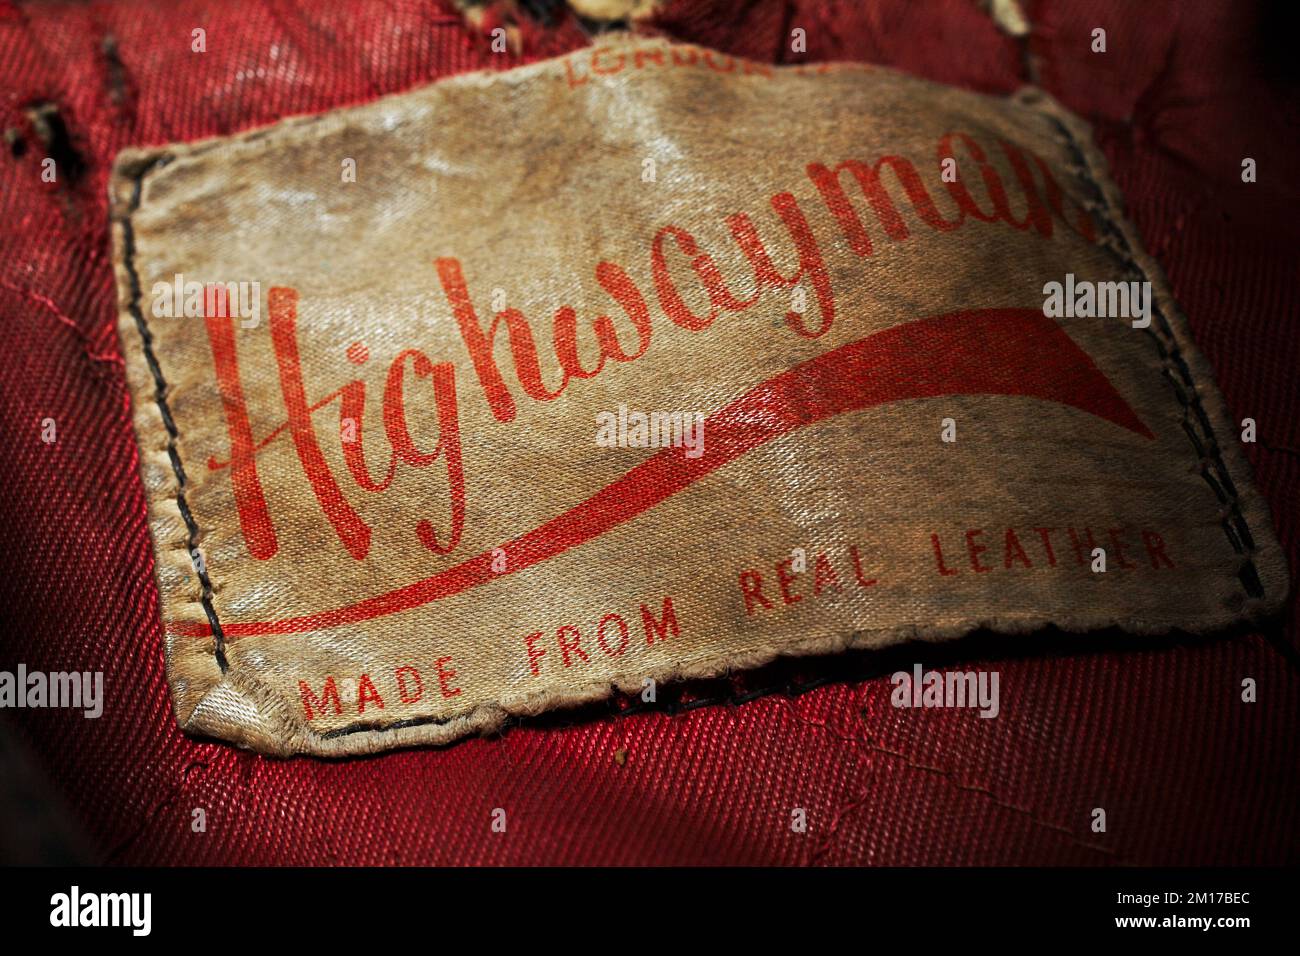 Highwayman label in a Lewis Leathers jacket. Stock Photo